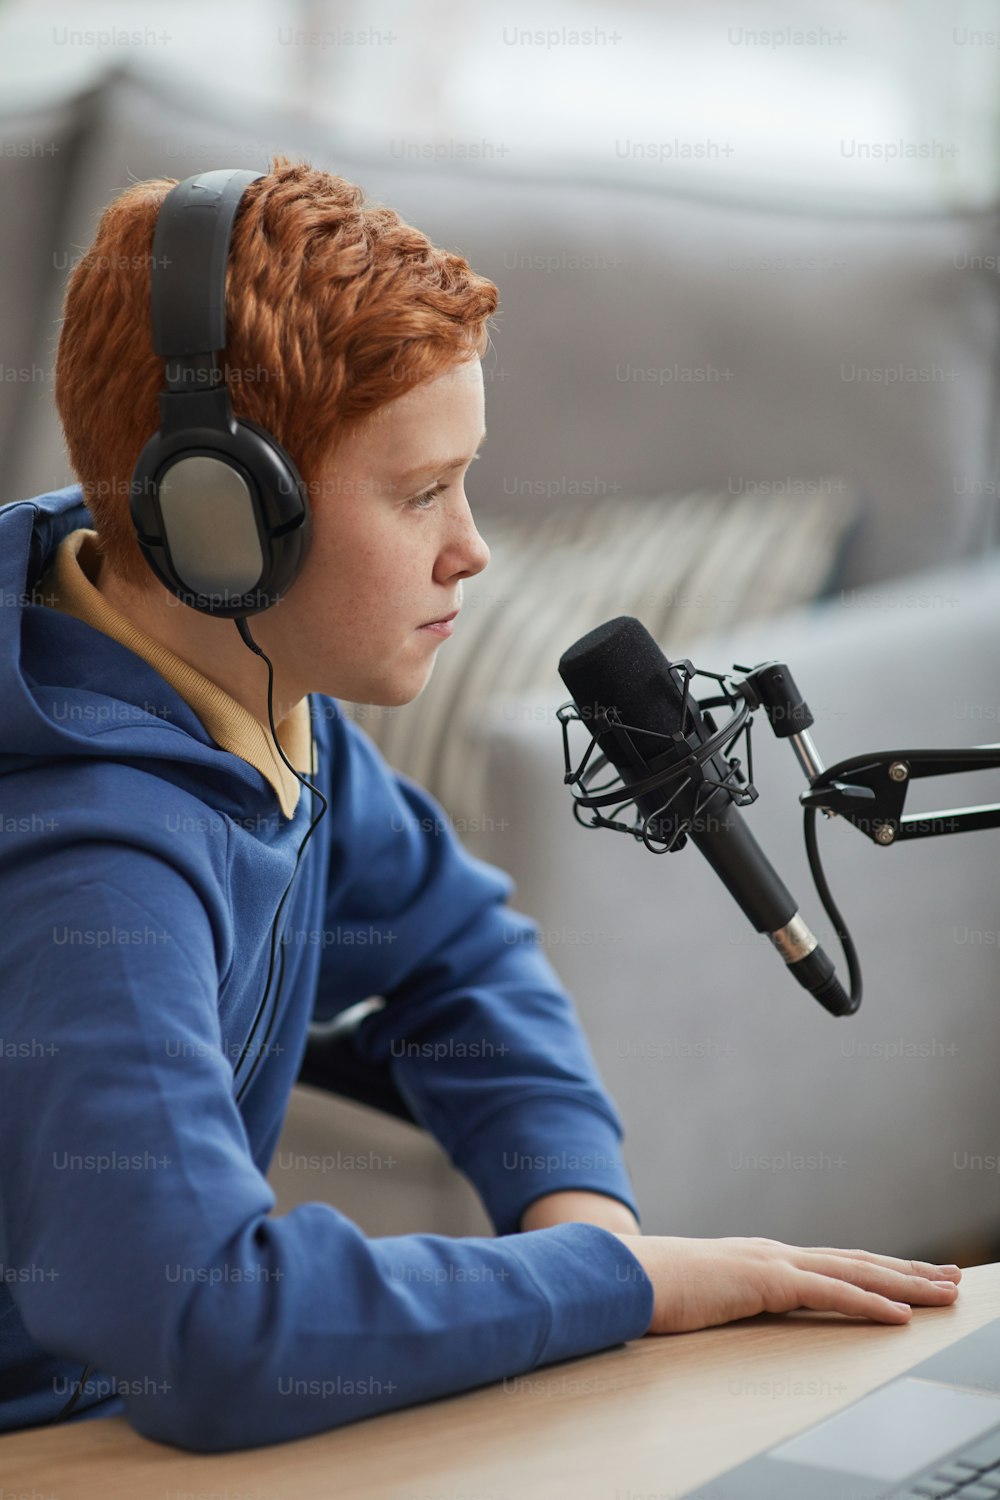 Vertical side view portrait of red haired teenage boy speaking to microphone and wearing headphones while recording podcast or online stream